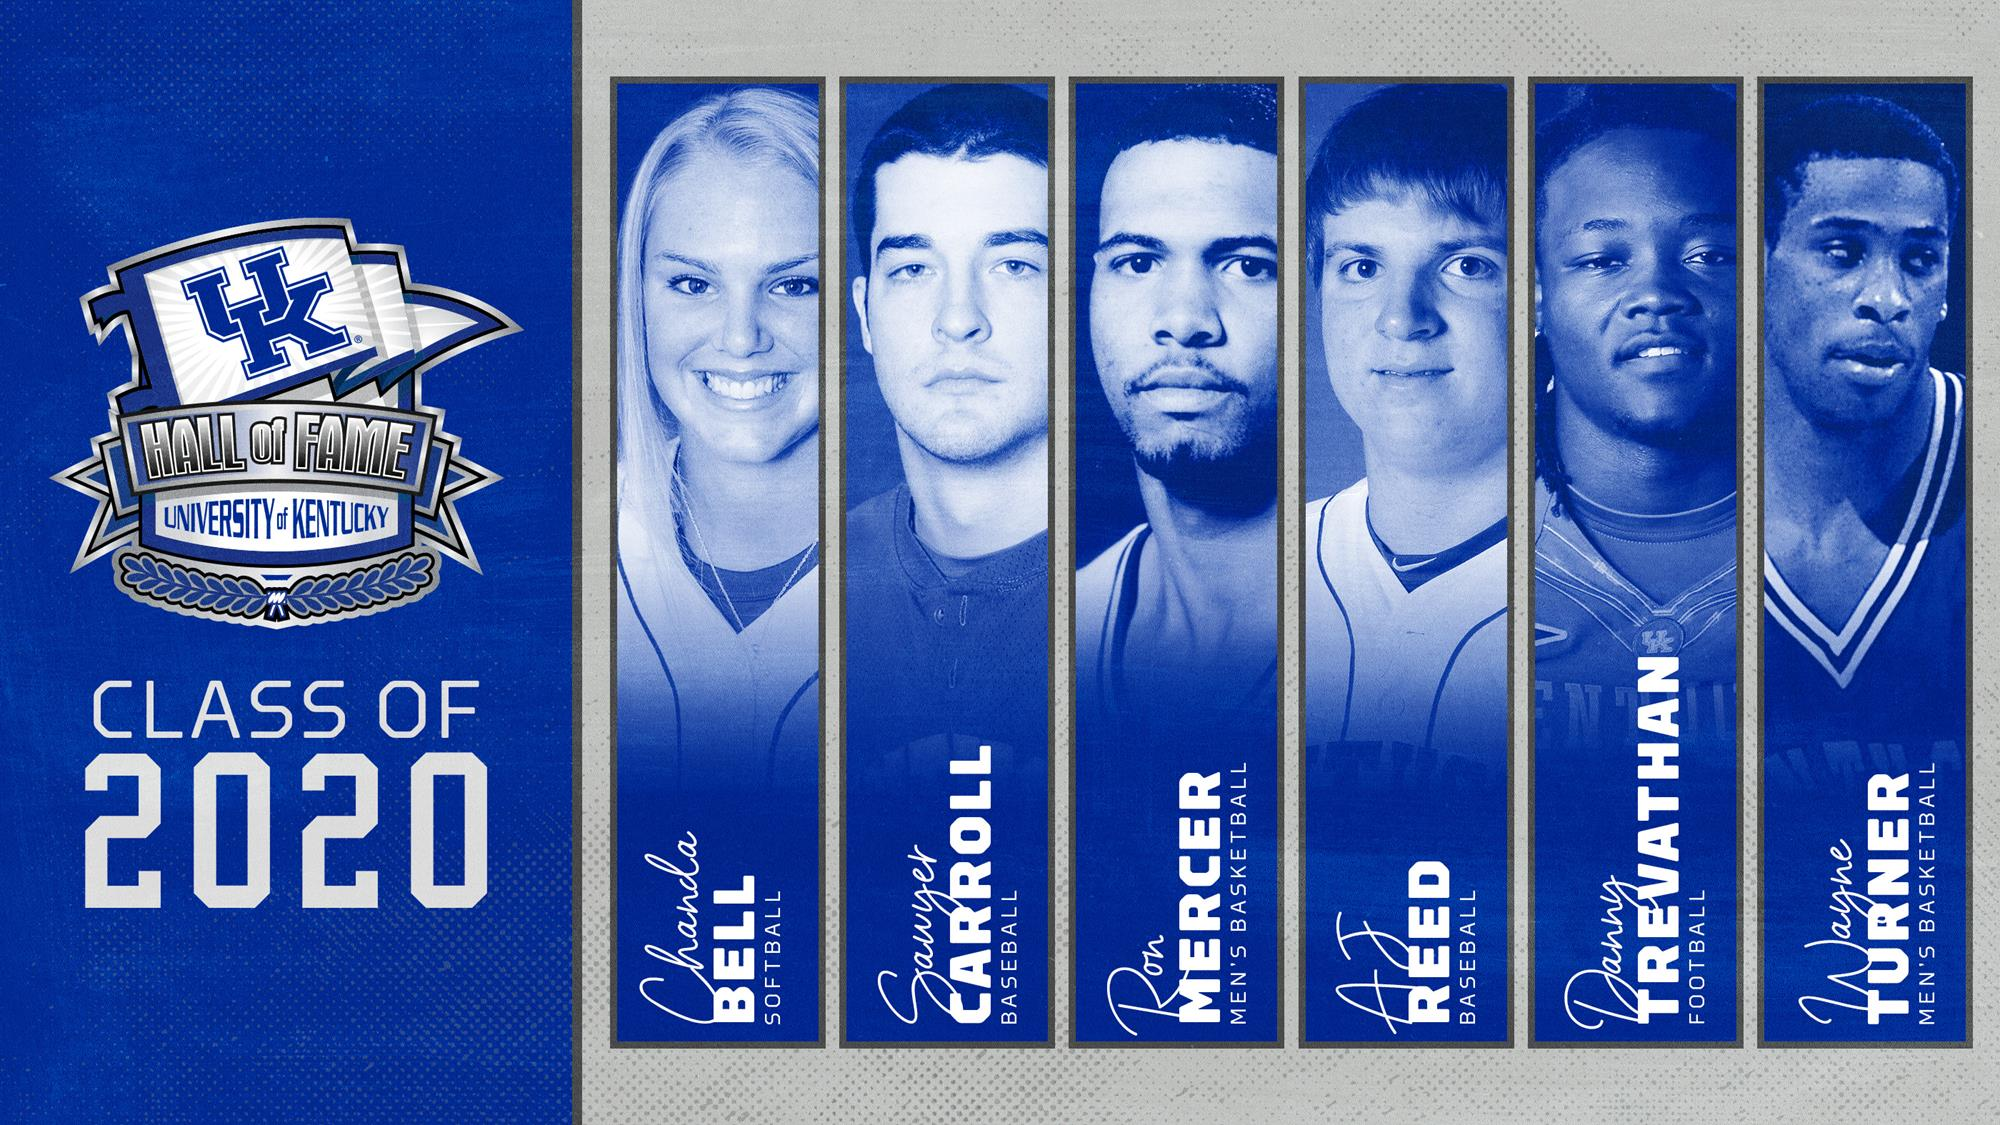 UK Athletics Announces Hall of Fame Class of 2020